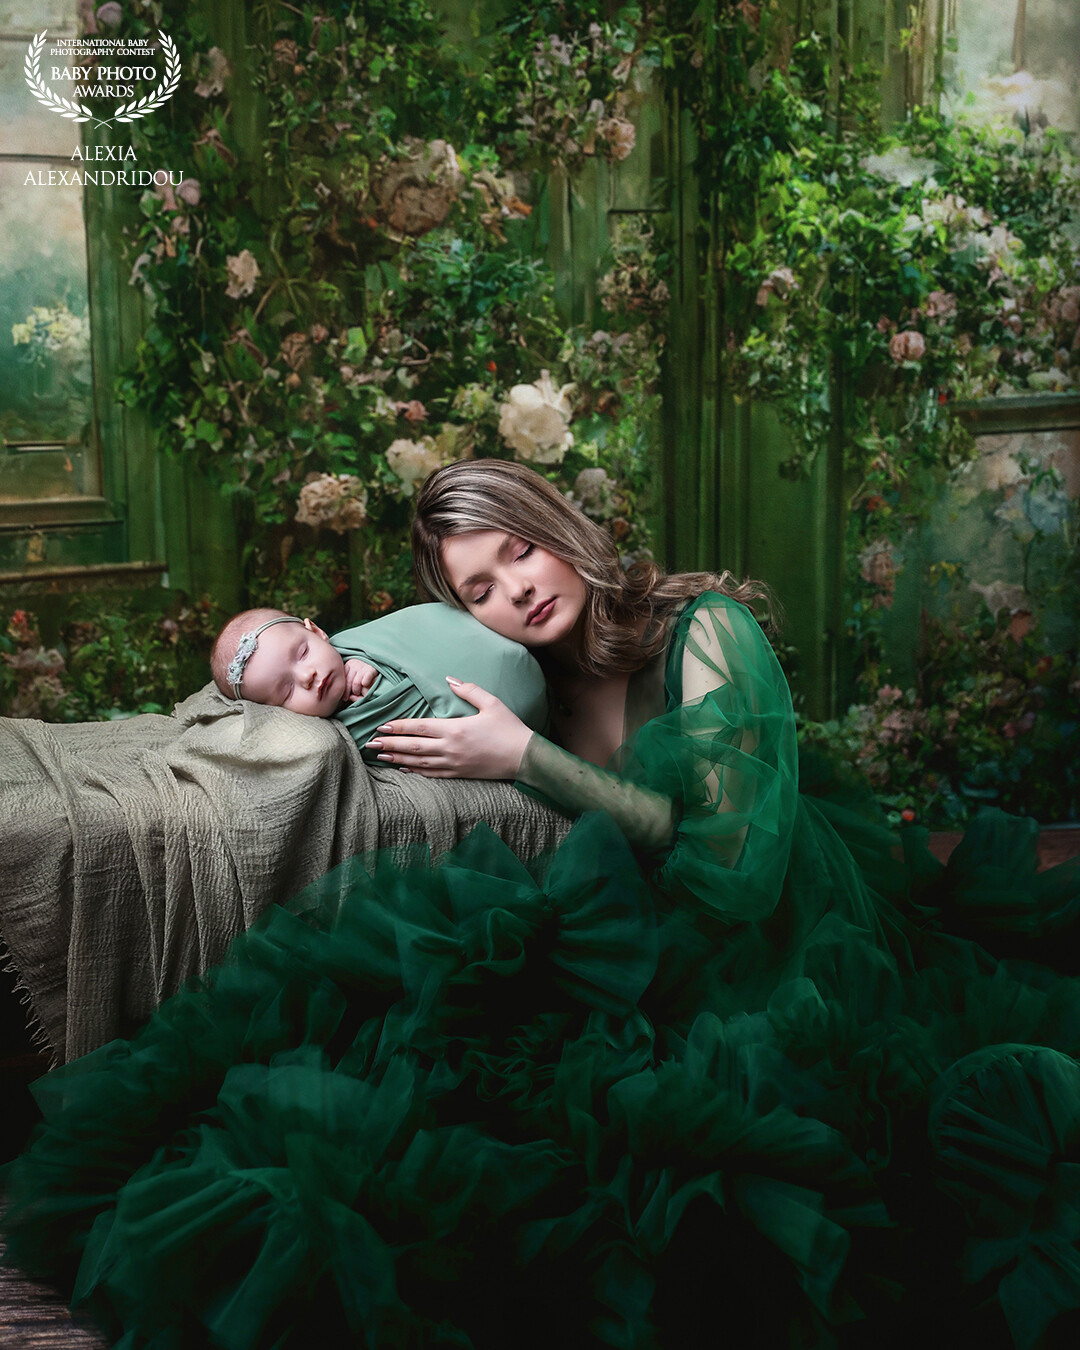 Even though the baby was over 2 months I wanted to create something very dreamy for this beautiful family, so during their session I thought of this image and I’m very happy that the mother loved my idea and went through with it ✨💚